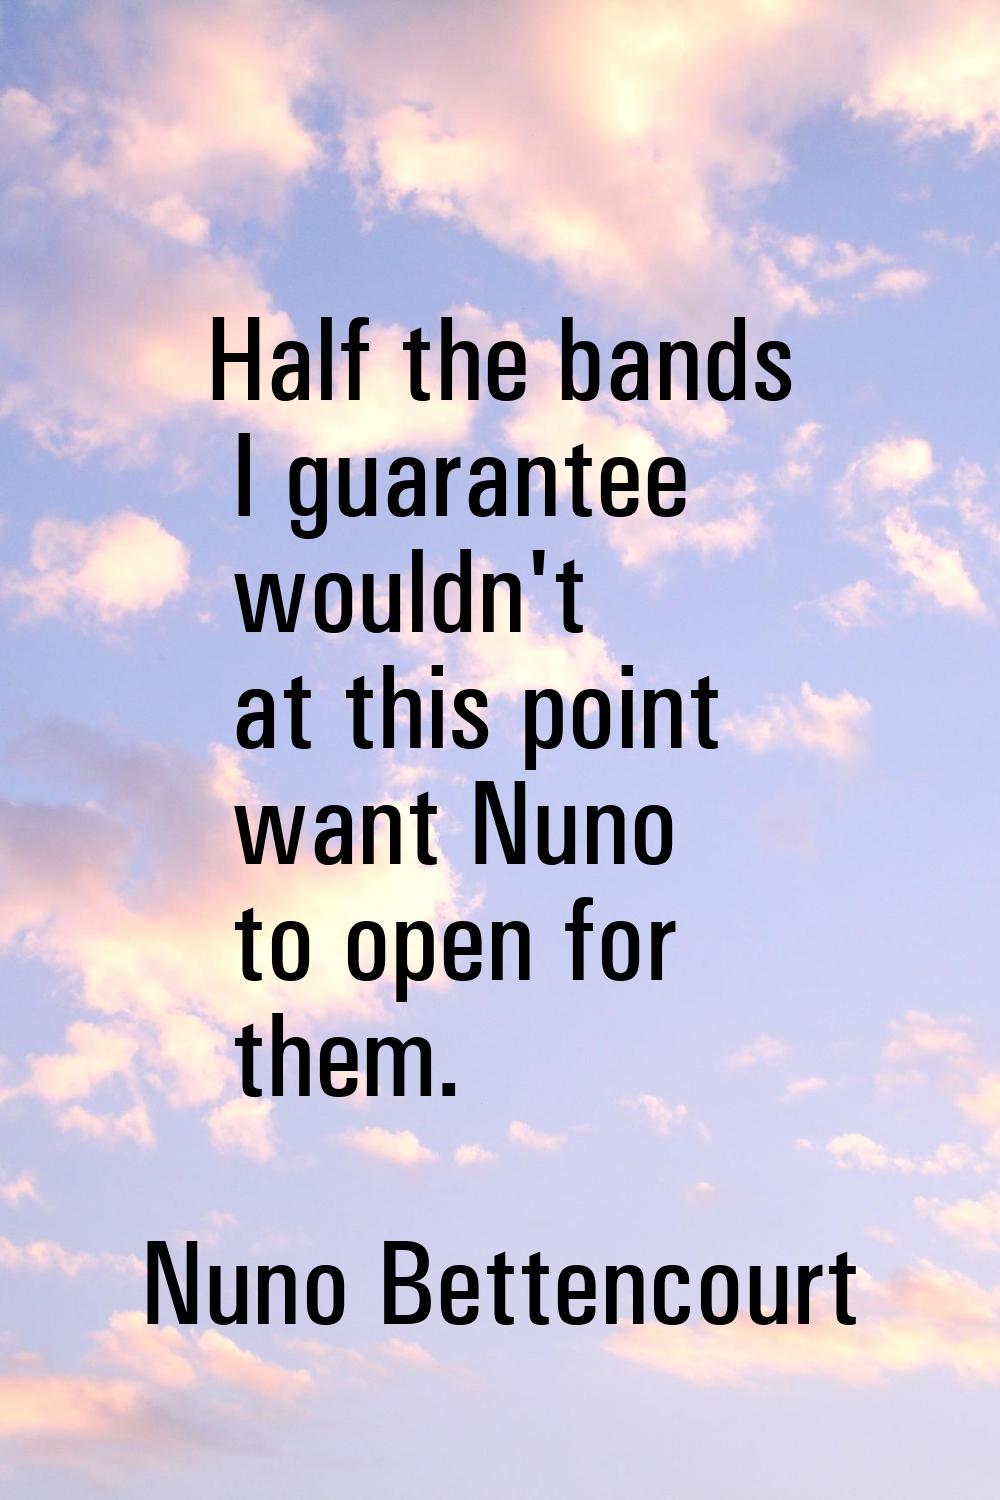 Half the bands I guarantee wouldn't at this point want Nuno to open for them.